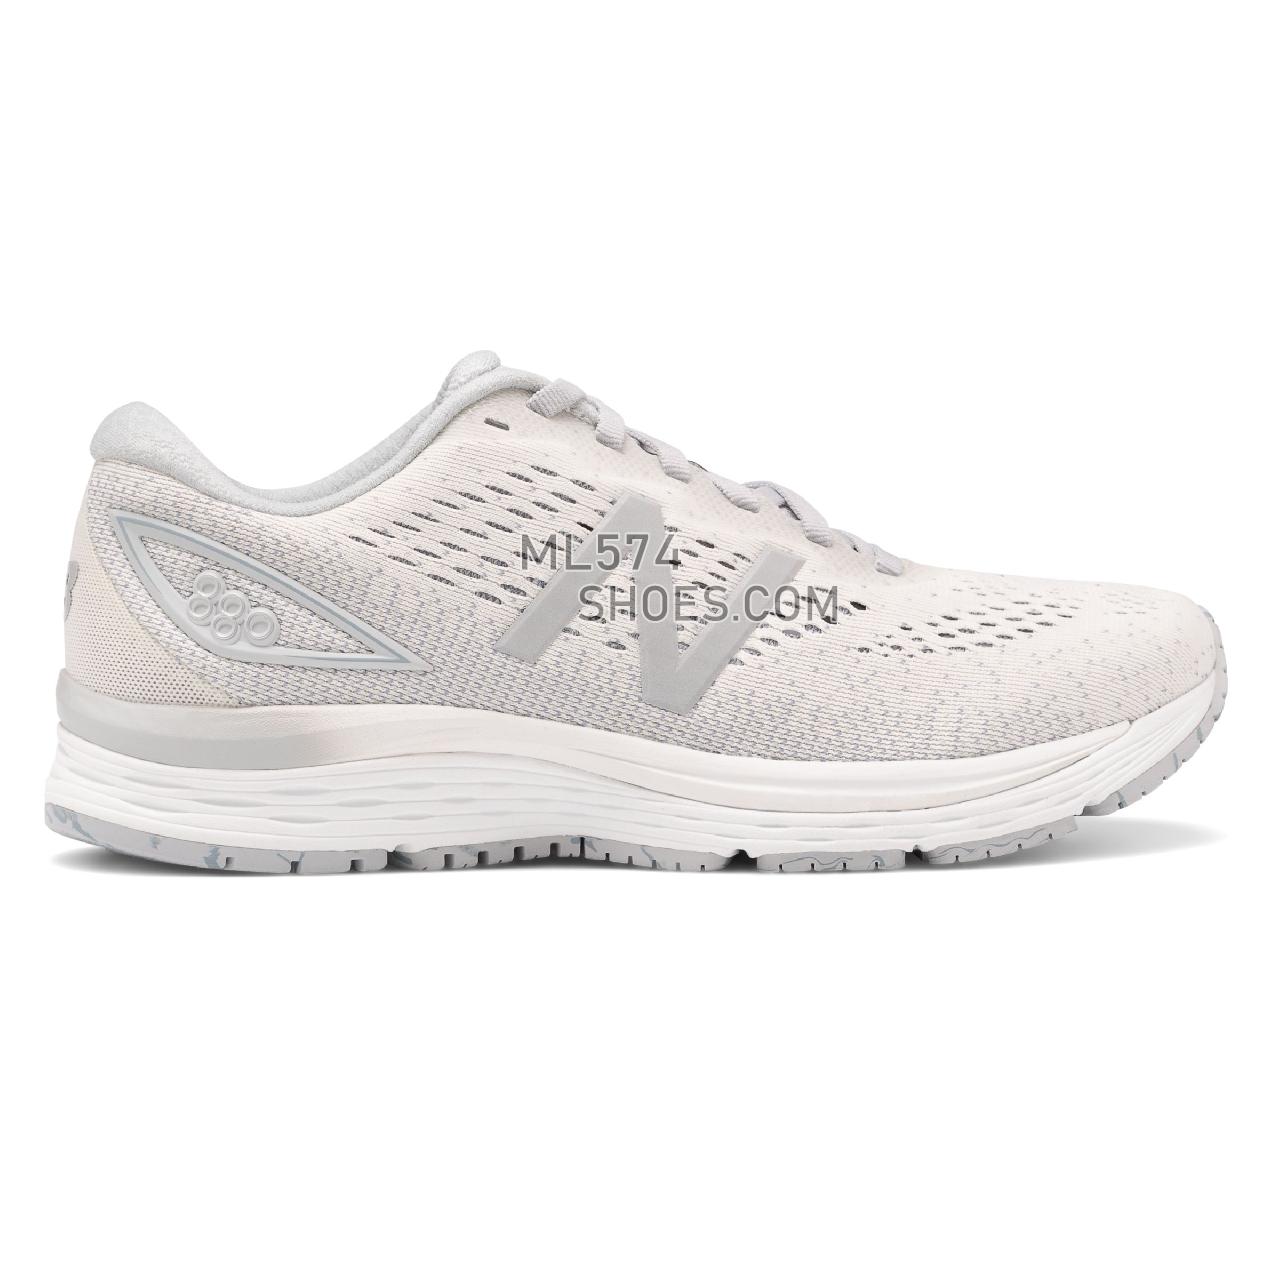 New Balance 880v9 - Women's Neutral Running - Sea Salt with Light Aluminum and Reflection - W880WO9